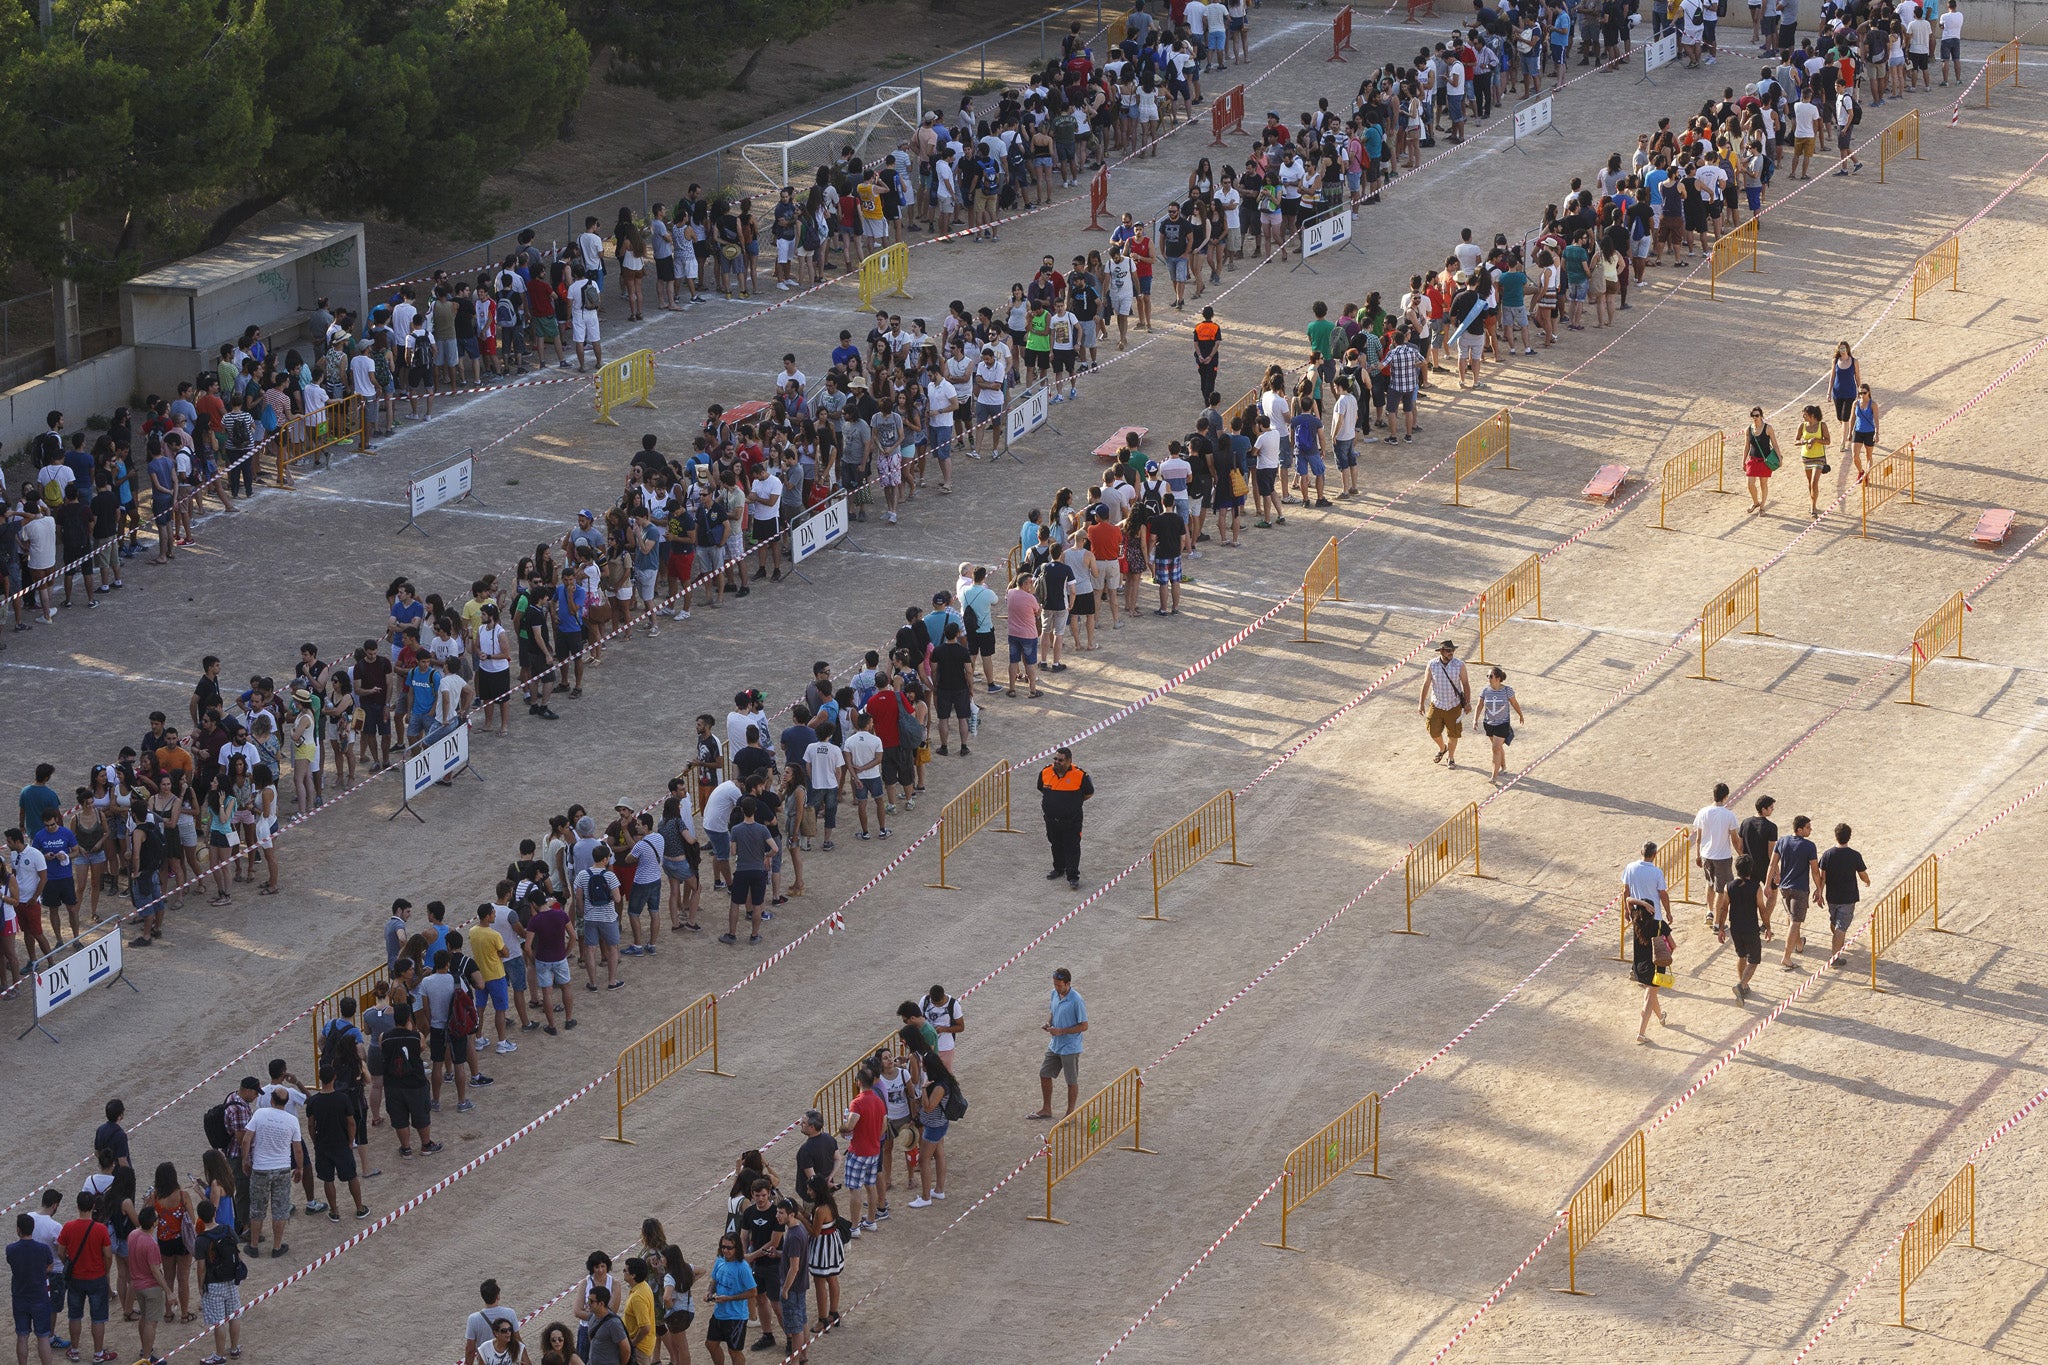 Game of Thrones fans queue for the chance of becoming an extra in Tudela, Spain